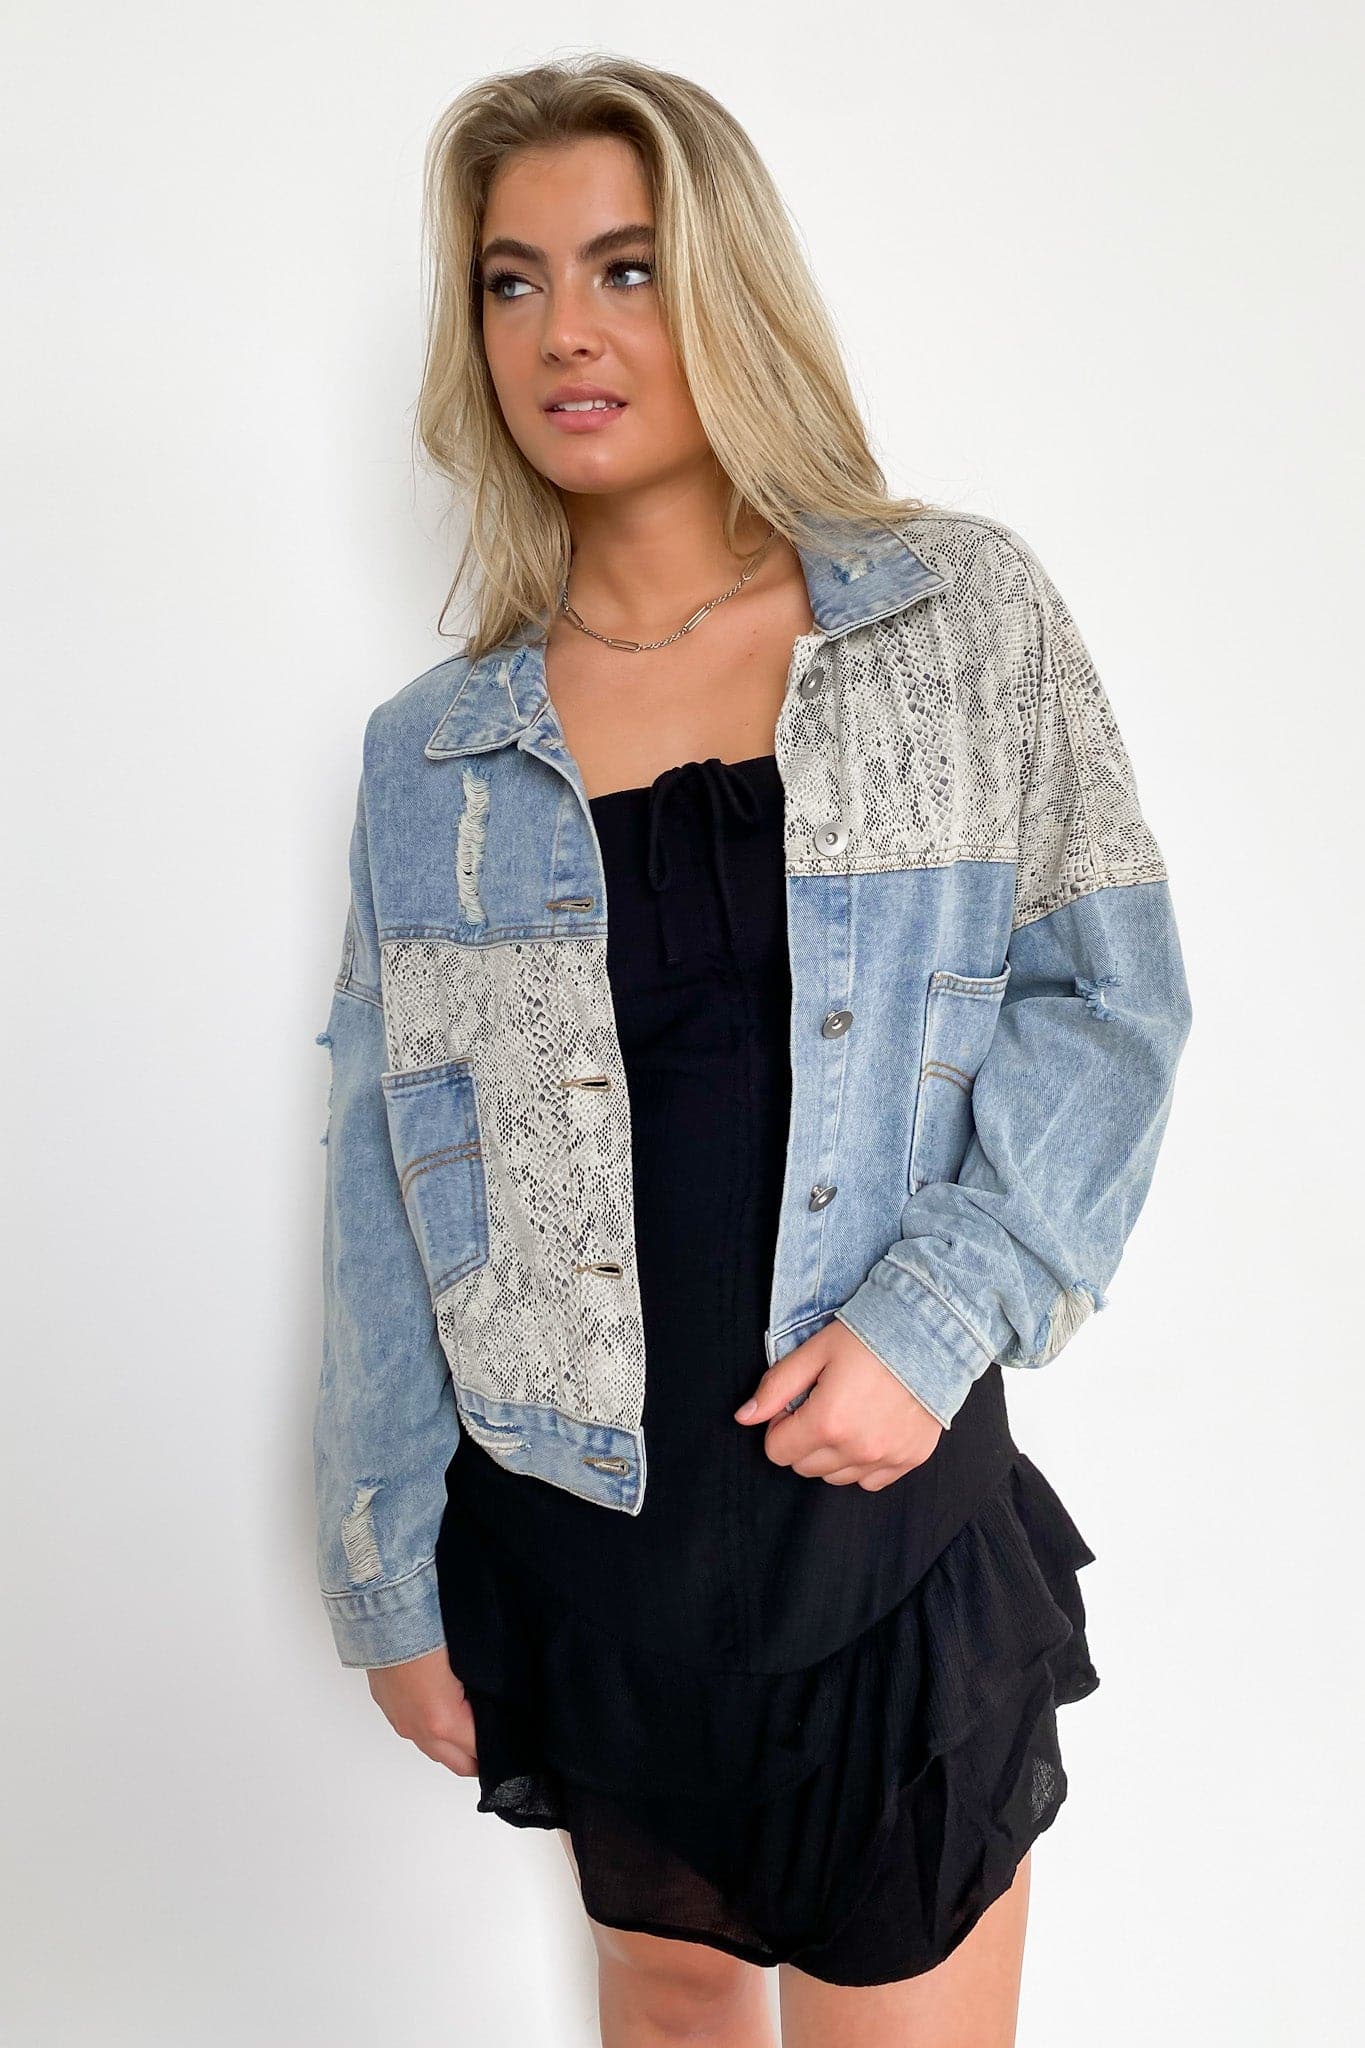  Genuine Confidence Snake Contrast Distressed Denim Jacket - FINAL SALE - Madison and Mallory